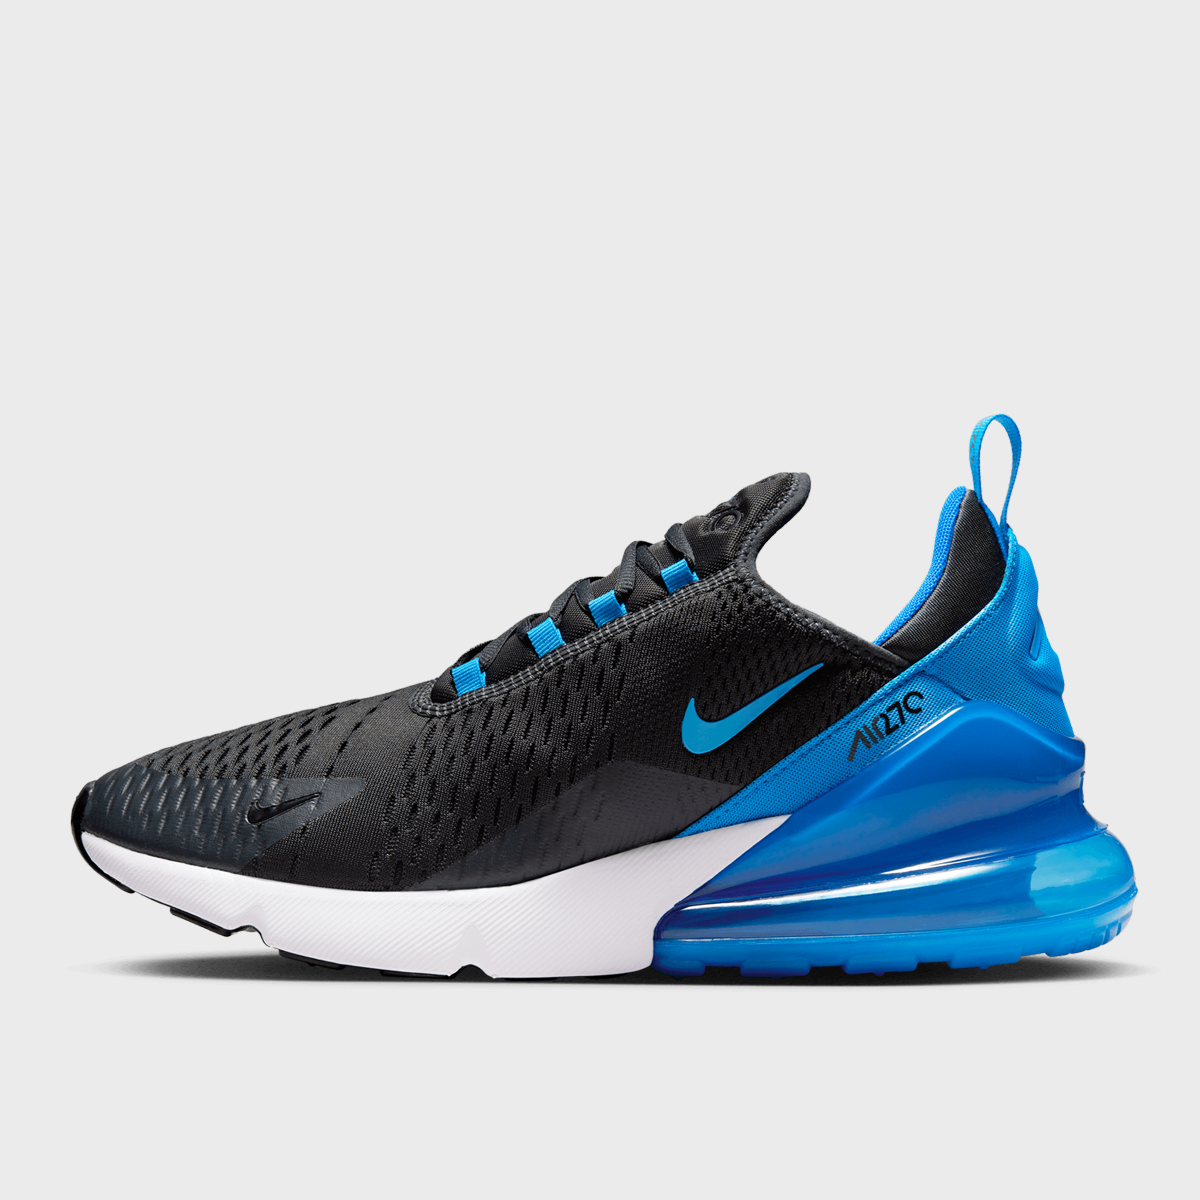 Air Max 270, NIKE, Footwear, anthracite/blue-black-white, taille: 42